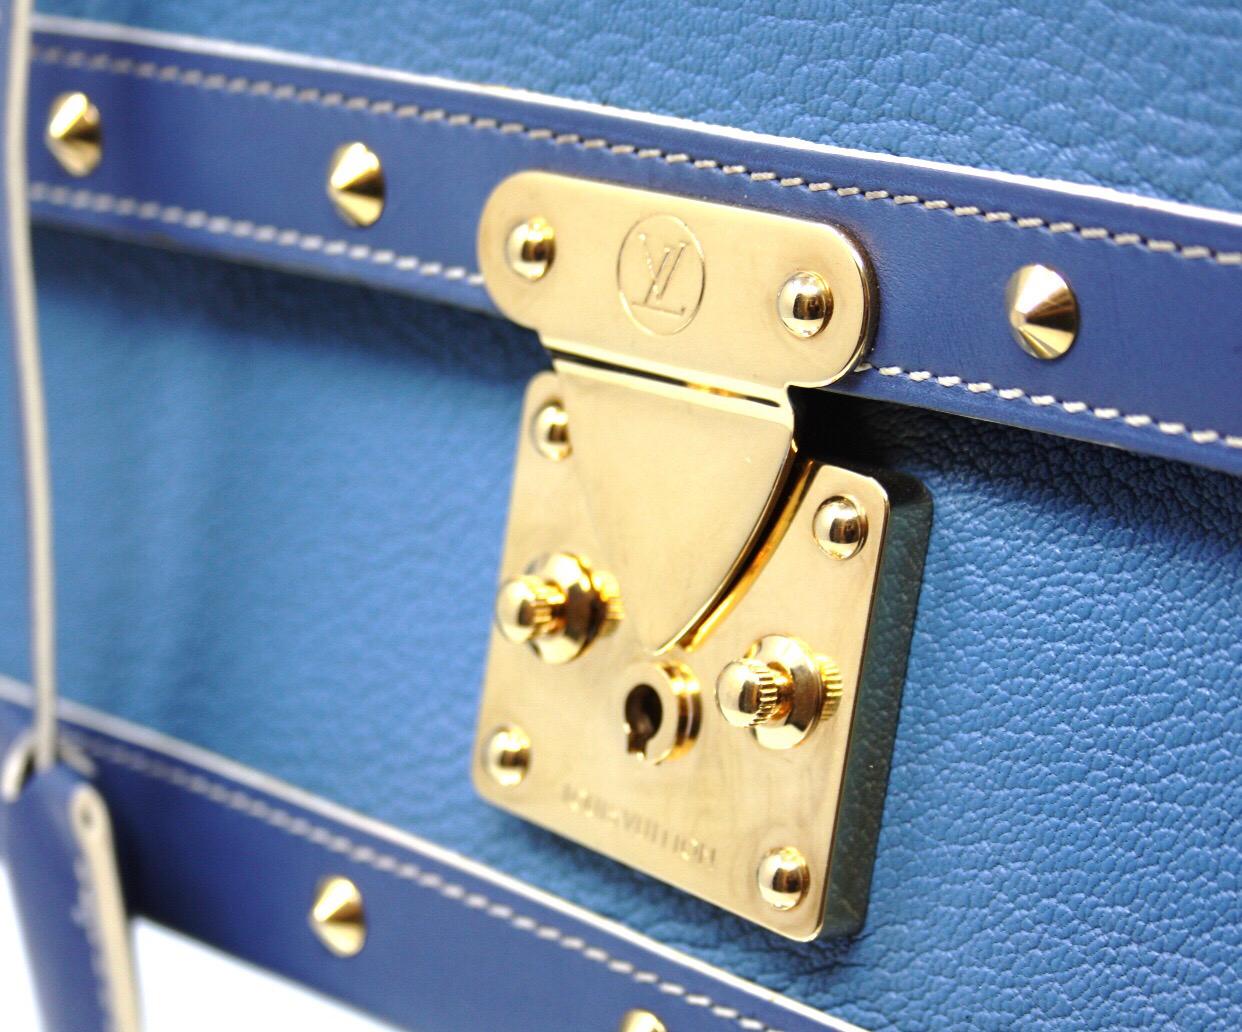 This Suhali Le Talentueux bag by Louis Vuitton is beautiful. The light blue beauty is made of leather and sports a unique and distinctive style. It has beautiful gold-colored pyramidal studs, push-lock closure, reinforced metal rings and edges,